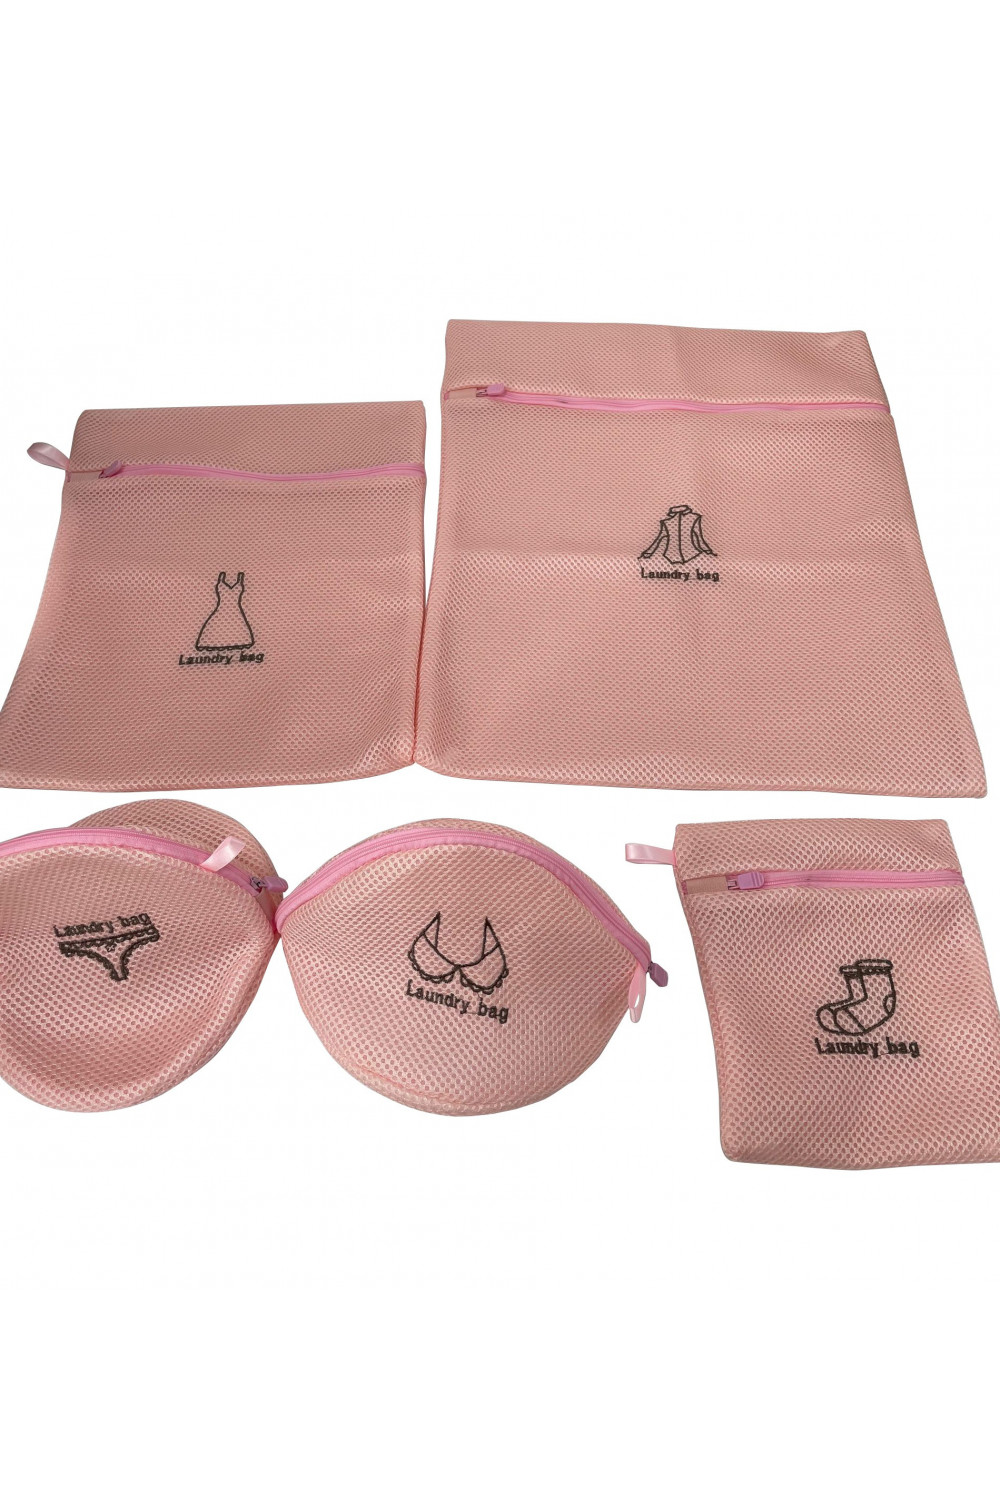 Set of pink pouches for washing your lingerie